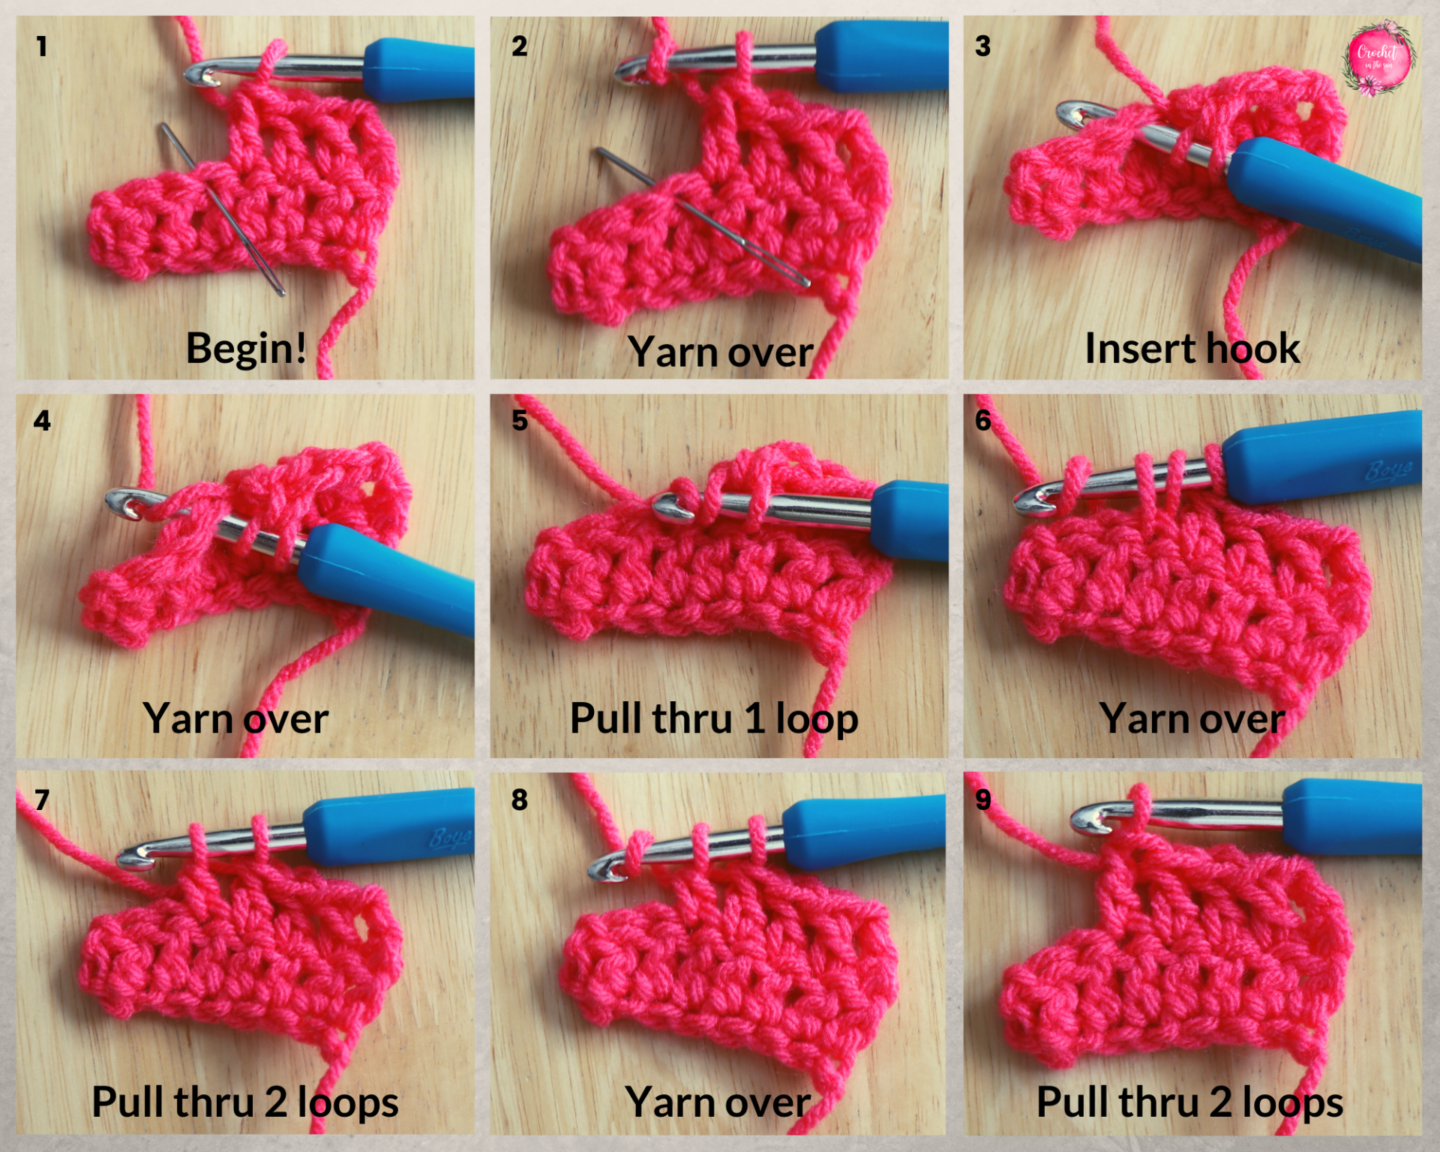 How to crochet - step by step photo tutorial for the double crochet stitch (dc). Beginner friendly tutorial.